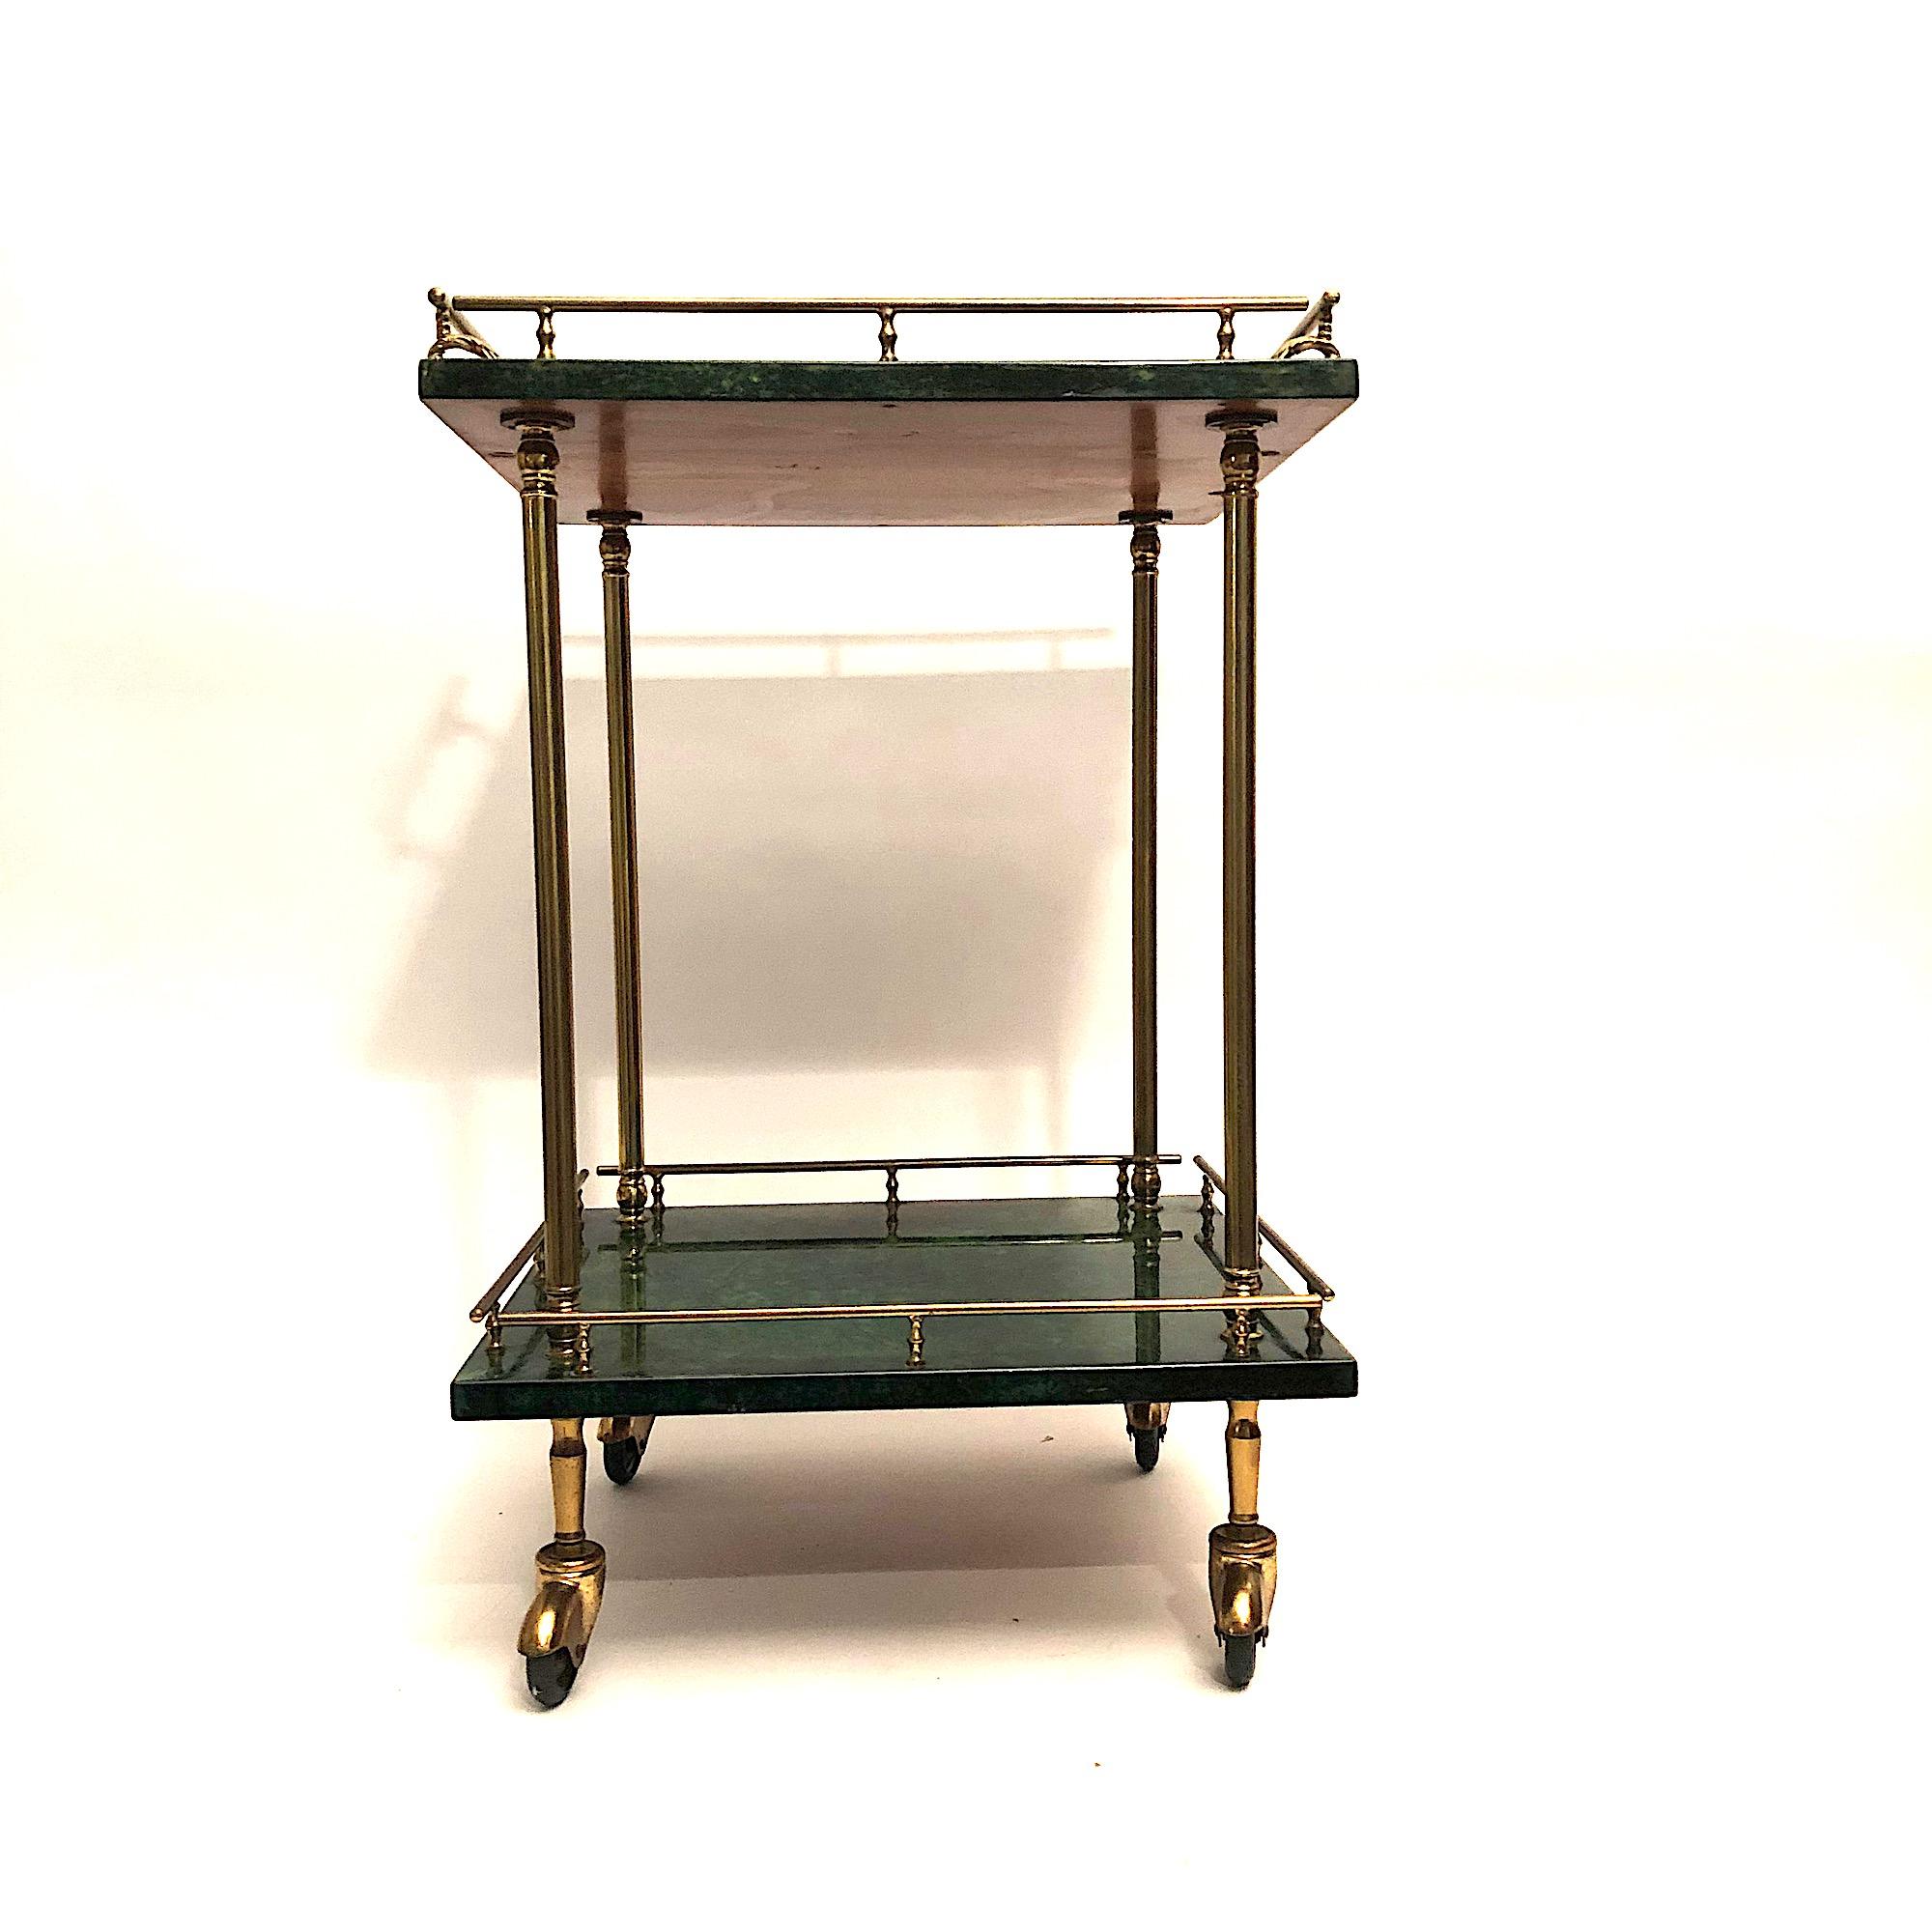 Aldo Tura 

Green goatskin parchment bar cart with two level. Nice Small Dimension. Nice vintage condition.

Aldo Tura started in the 1930s and fully developed in the 1950s a successful business designing pieces that were a mixture of sculptural